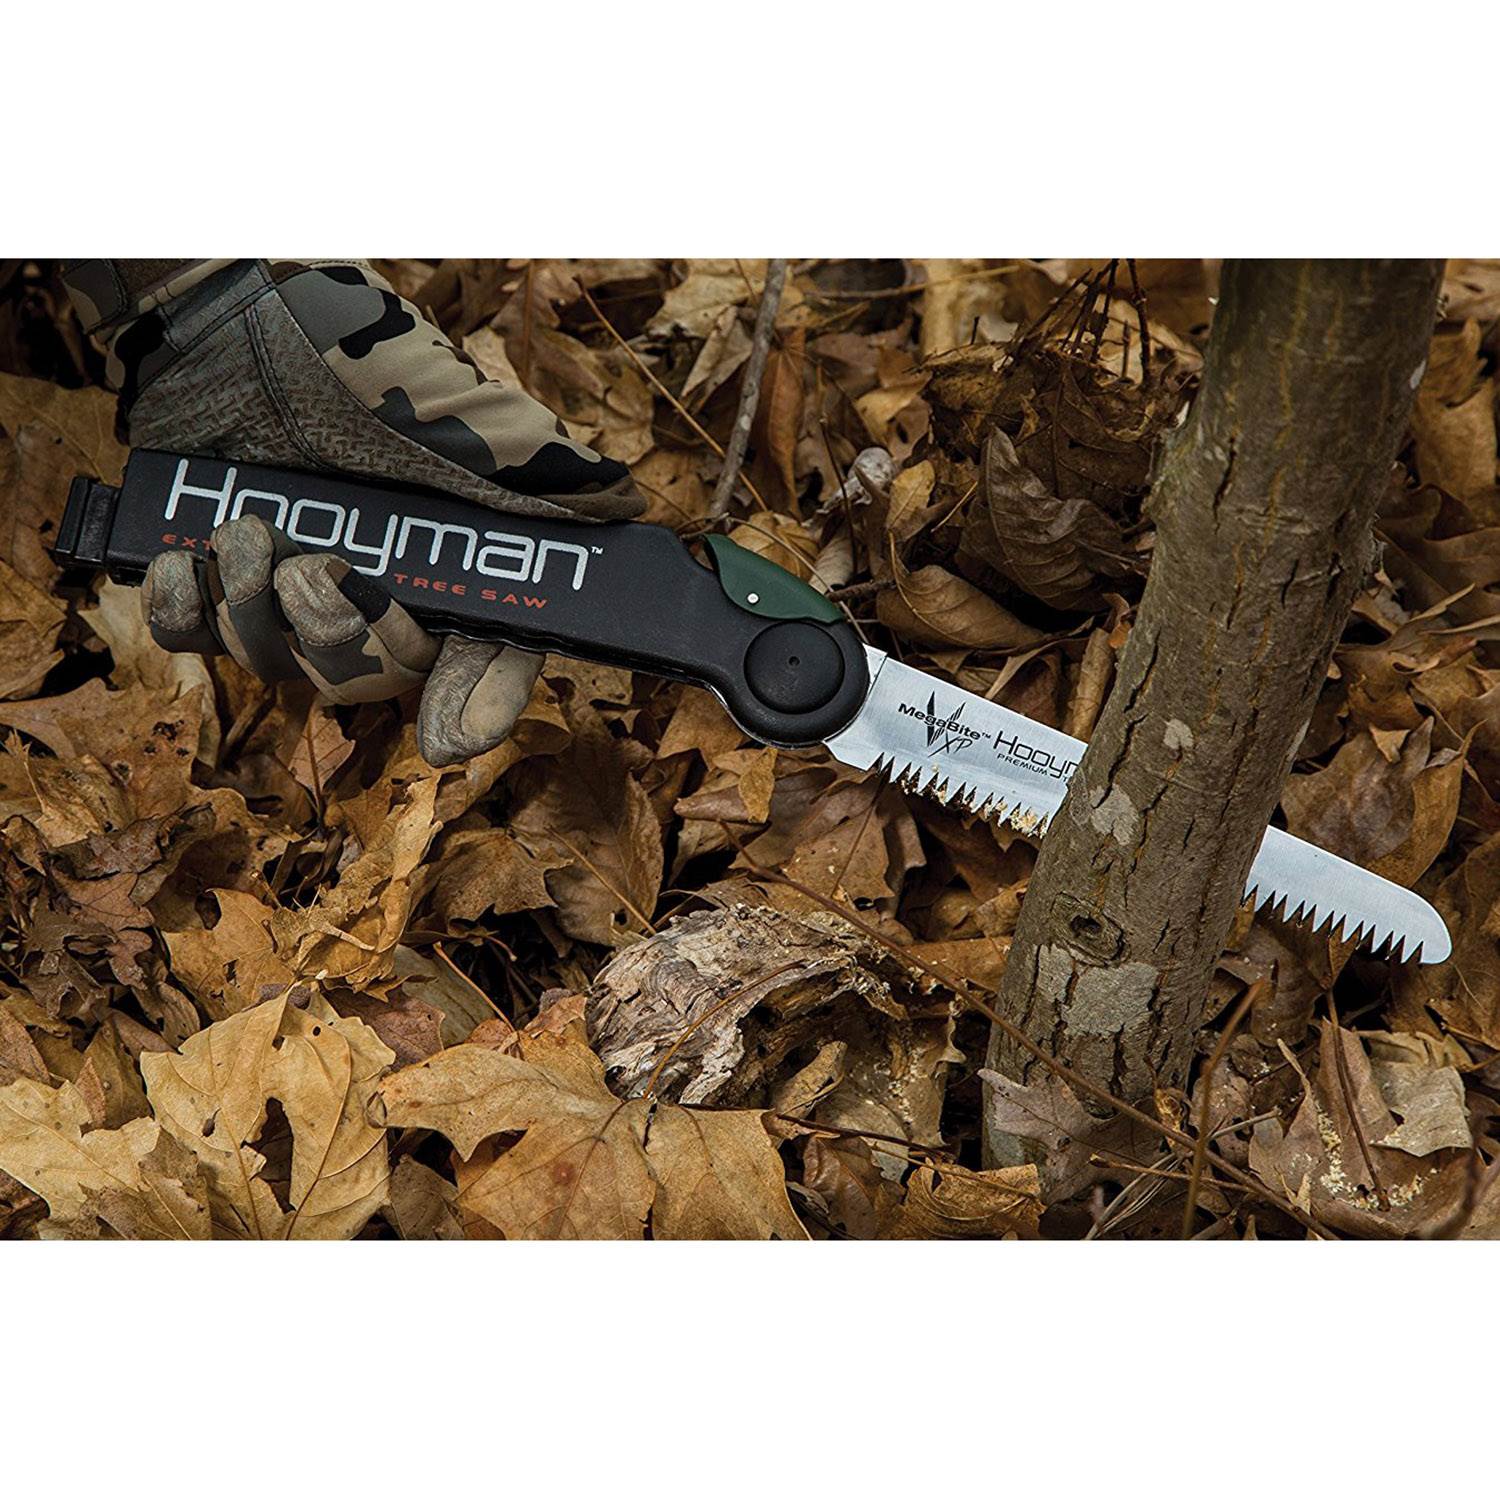 Hooyman 655226 Foot Extendable Tree Saw with Wrist Lanyard and Sling for  Cutting Trimming Hunting and Camping Walmart Canada